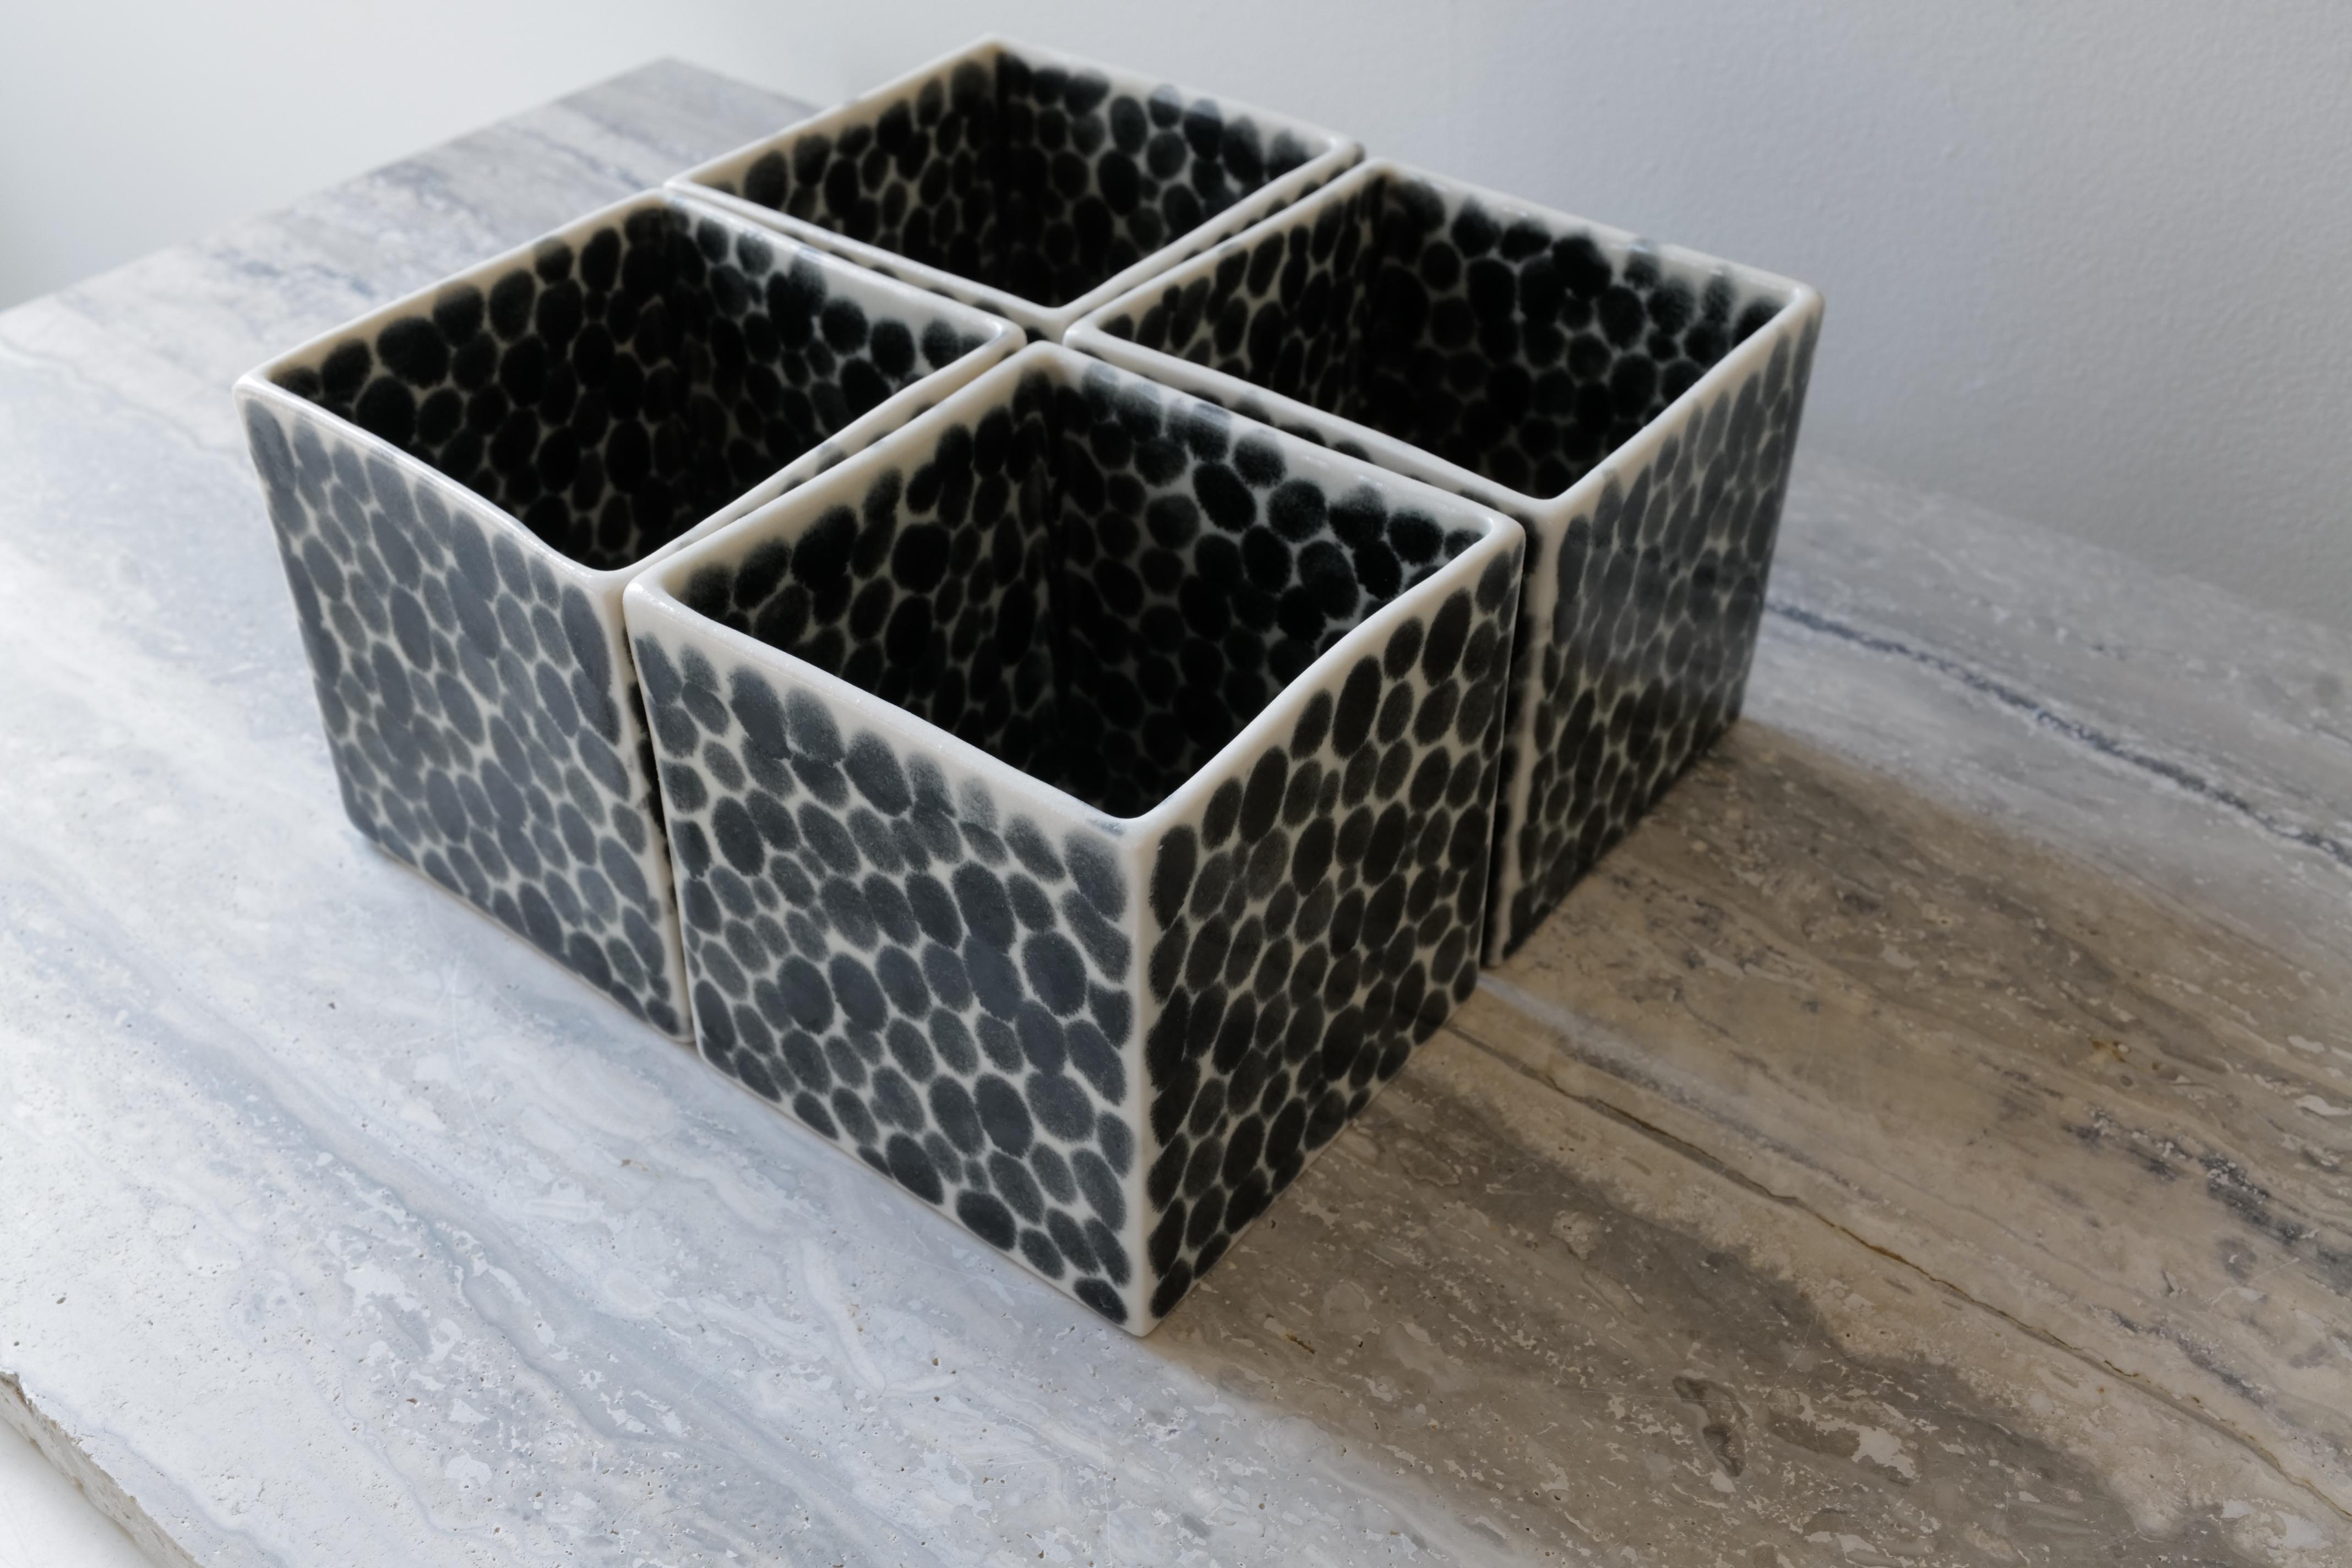 Set of 4 Black Dots Porcelain Cubes by Lana Kova In New Condition For Sale In New York City, NY